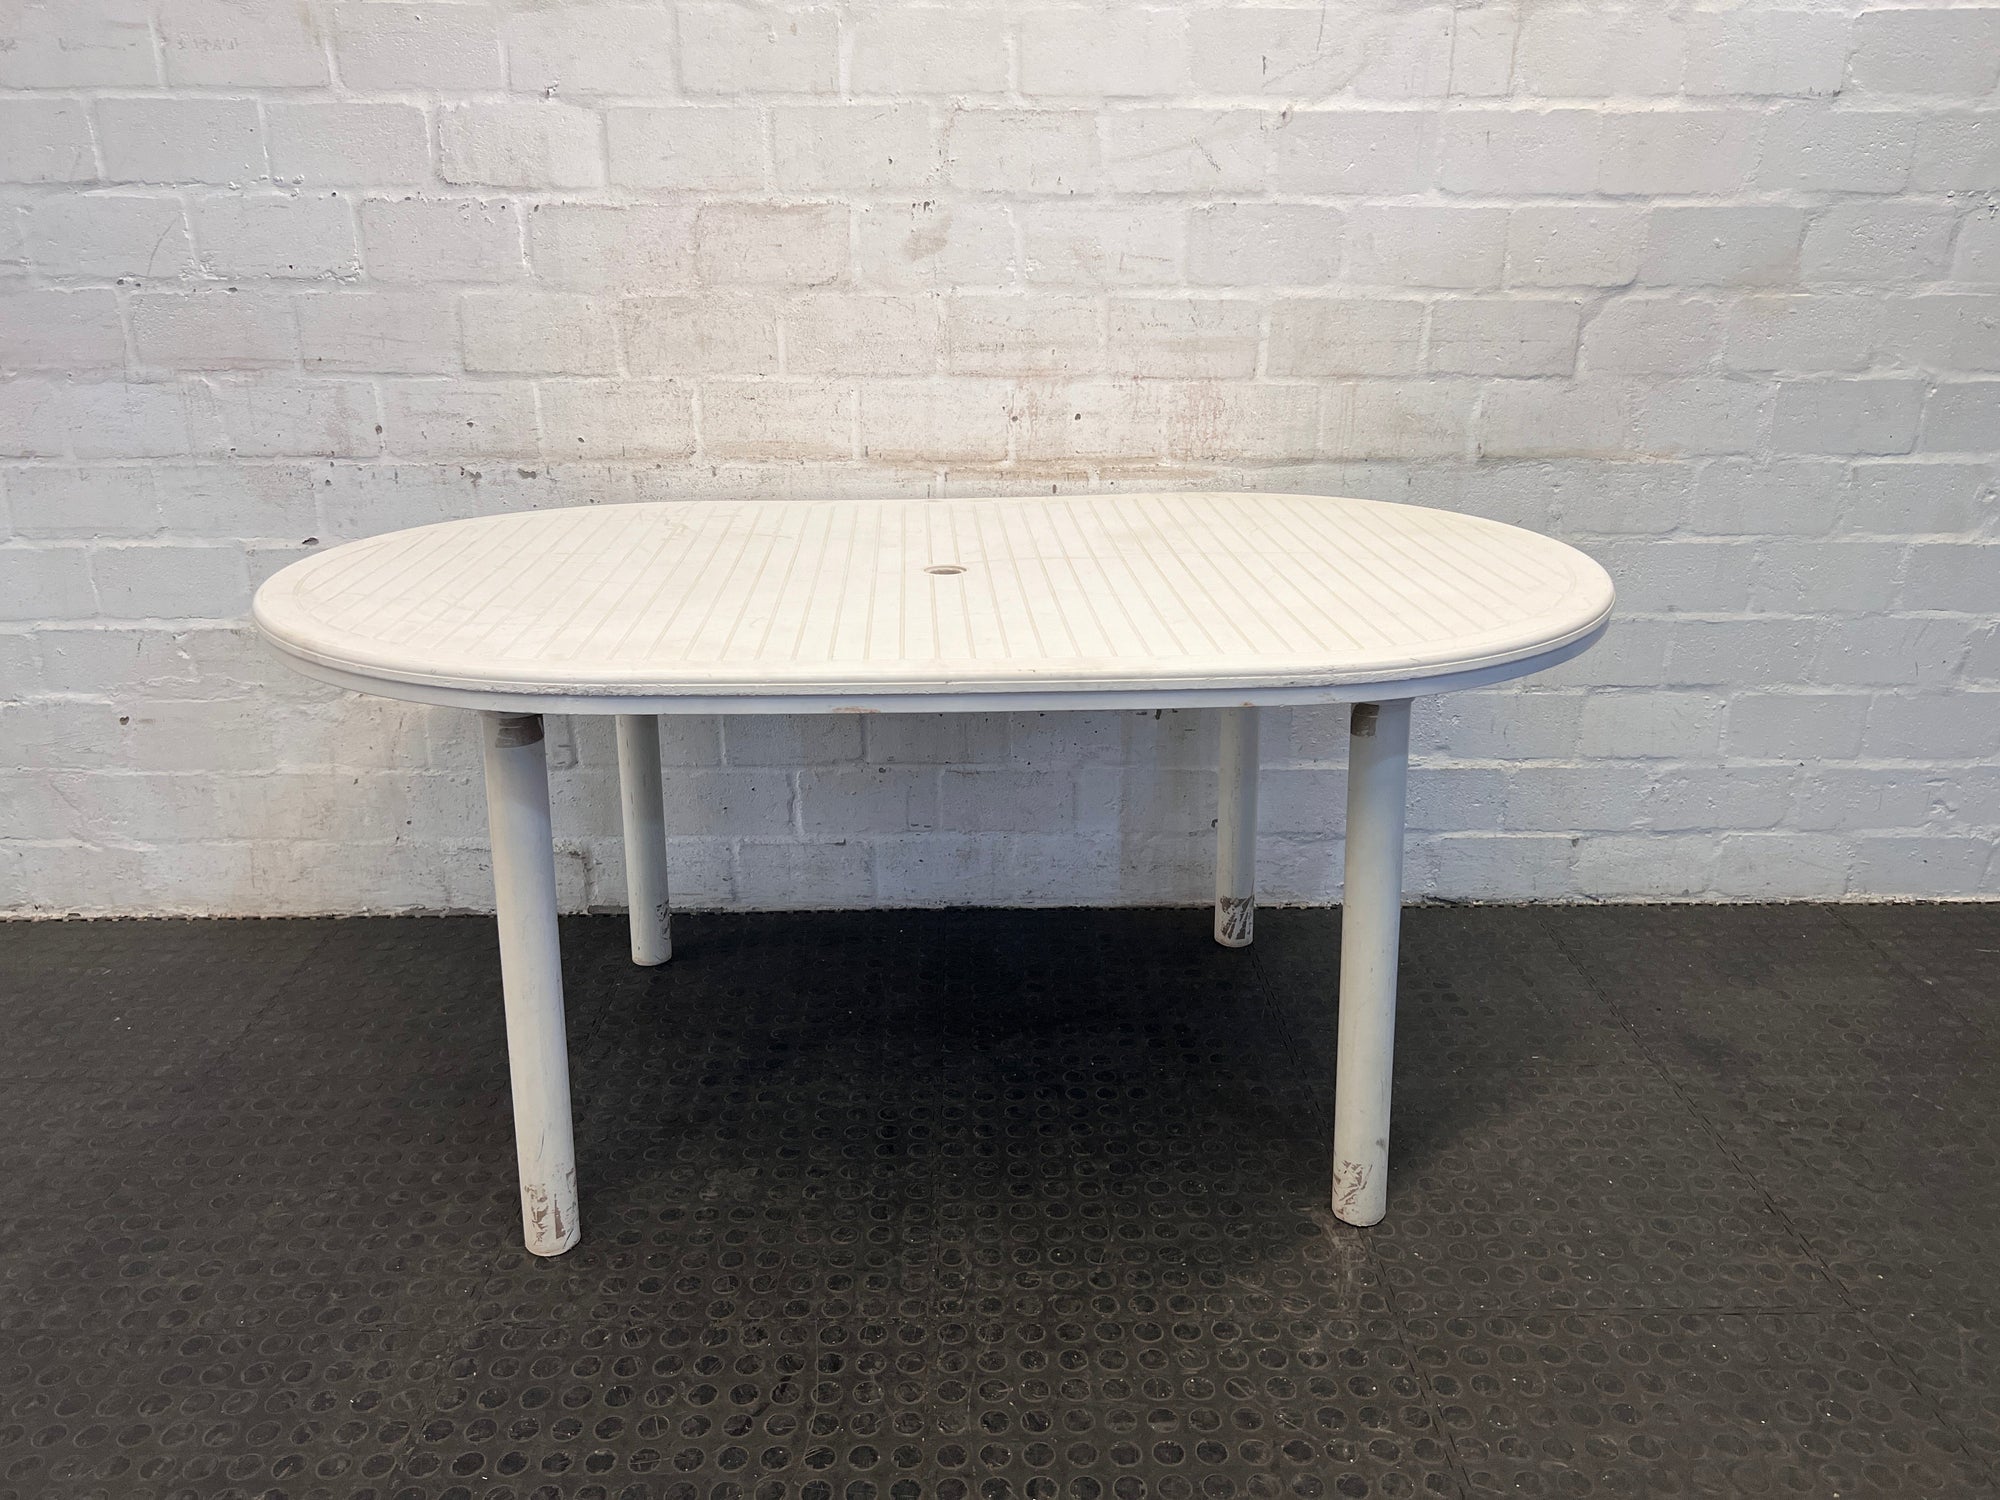 White Outdoor Plastic Table (Surface Scratches)